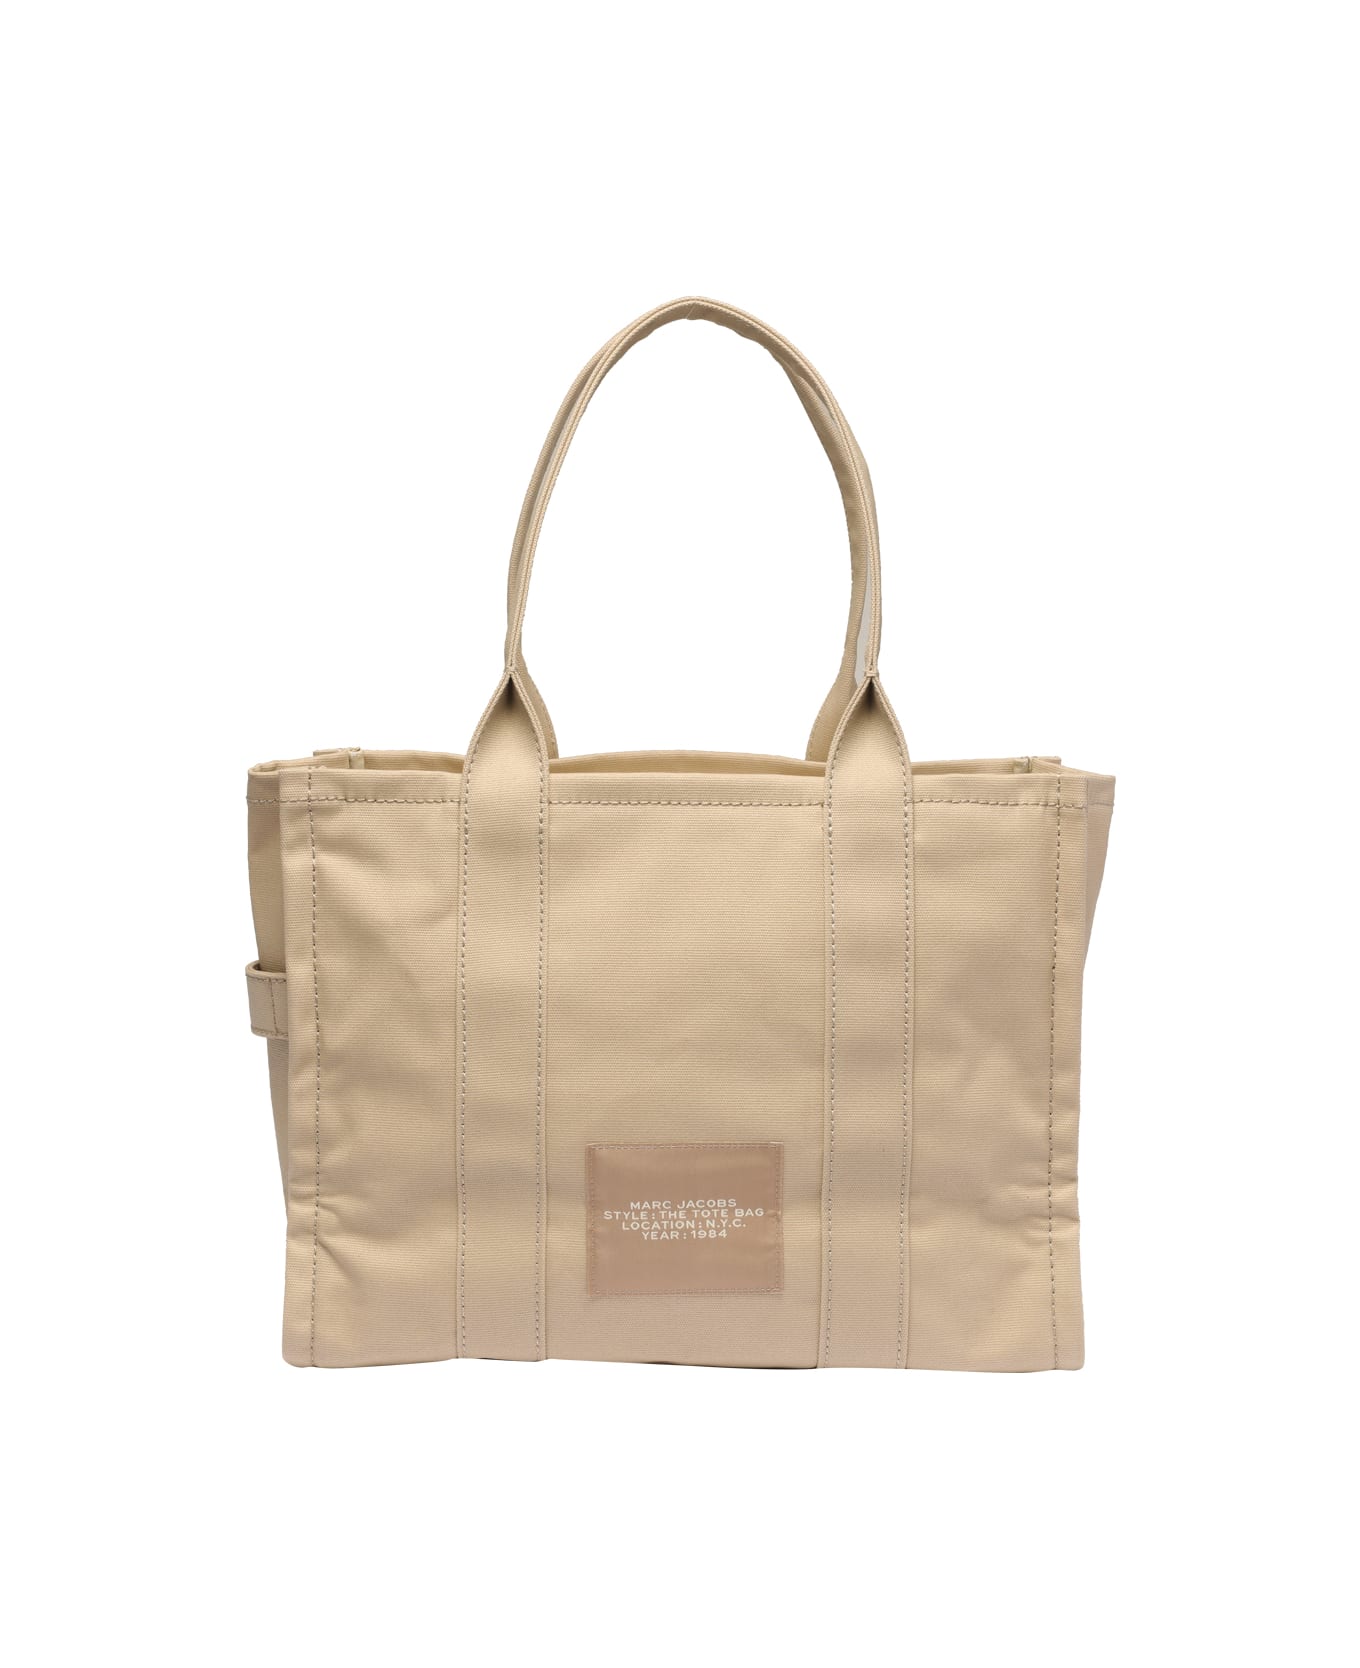 Marc Jacobs The Tote Large Bag - Beige トートバッグ